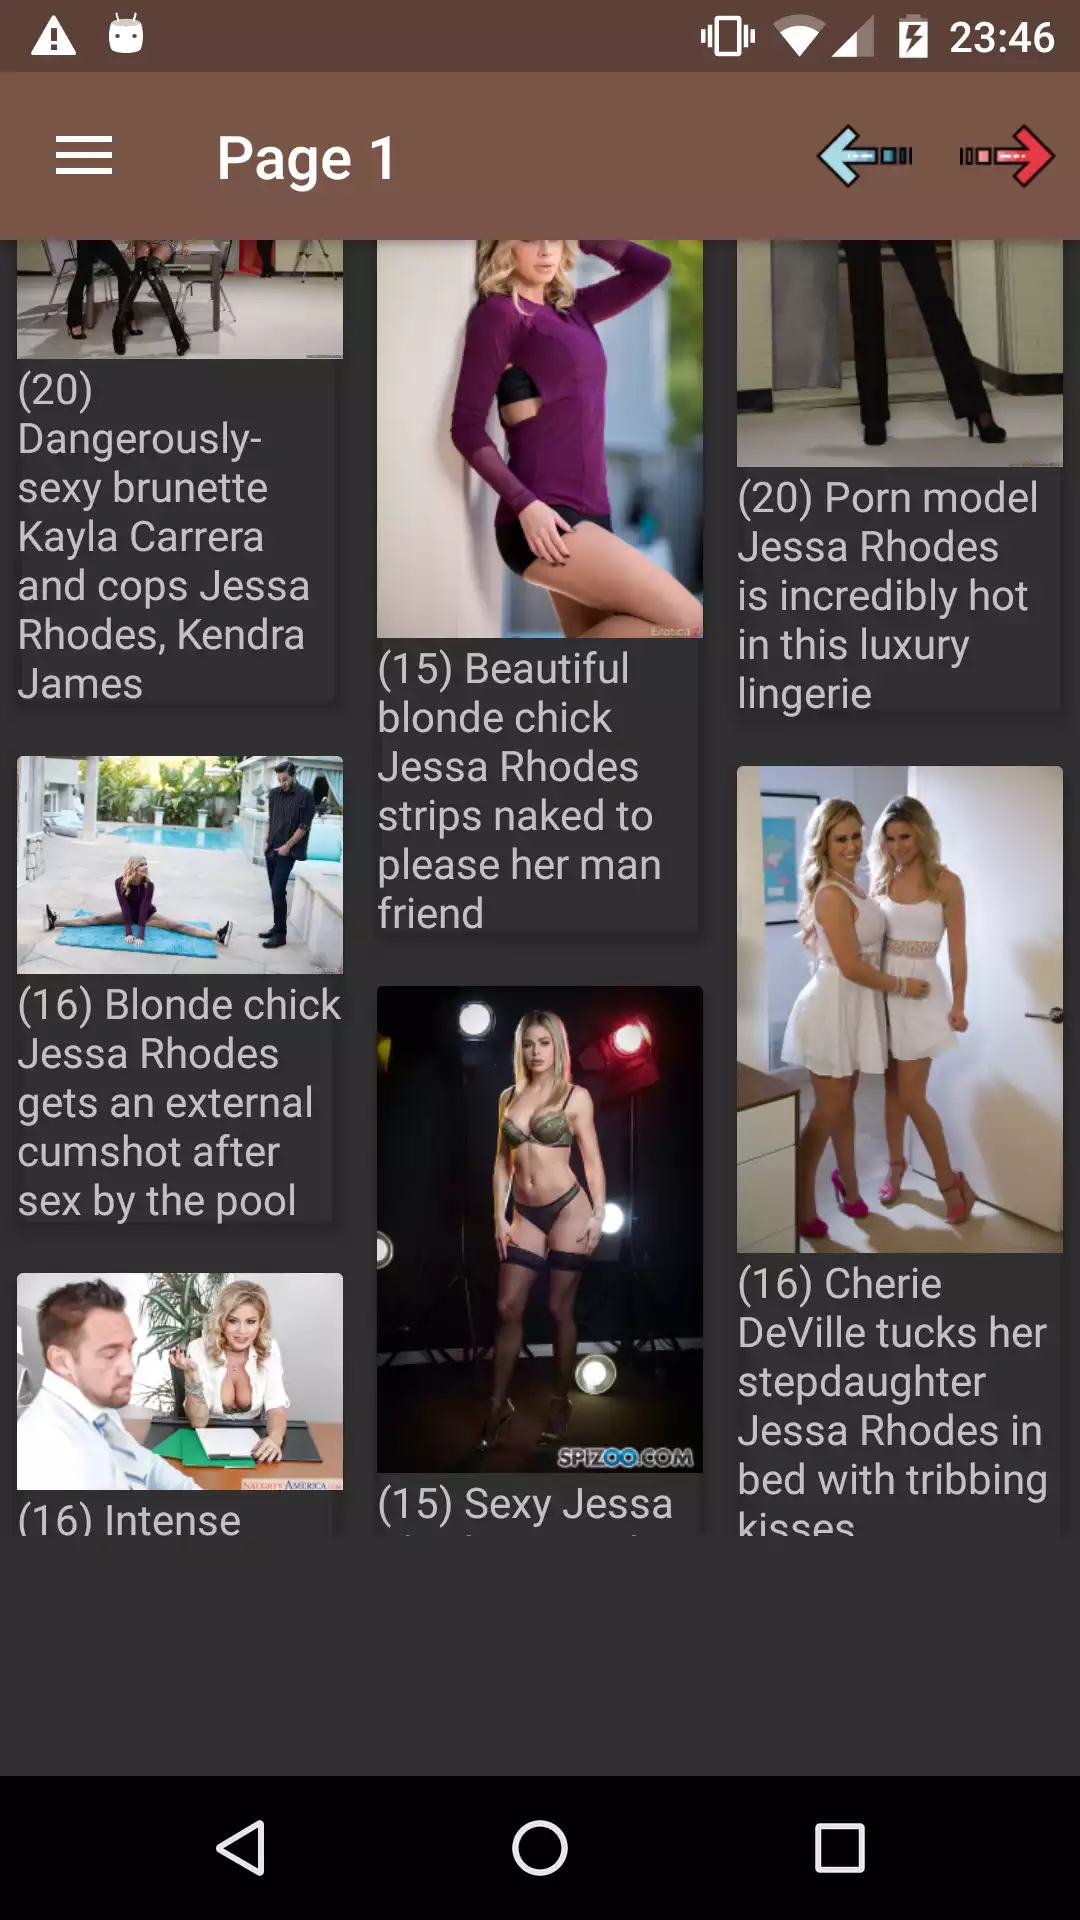 Jessa Rhodes app,daily,pornstars,downloader,galleries,porn,henrai,pic,best,perfect,girls,pics,shemales,android,sexy,gallery,download,hentai,photos,picture,apps,pornstar,hot